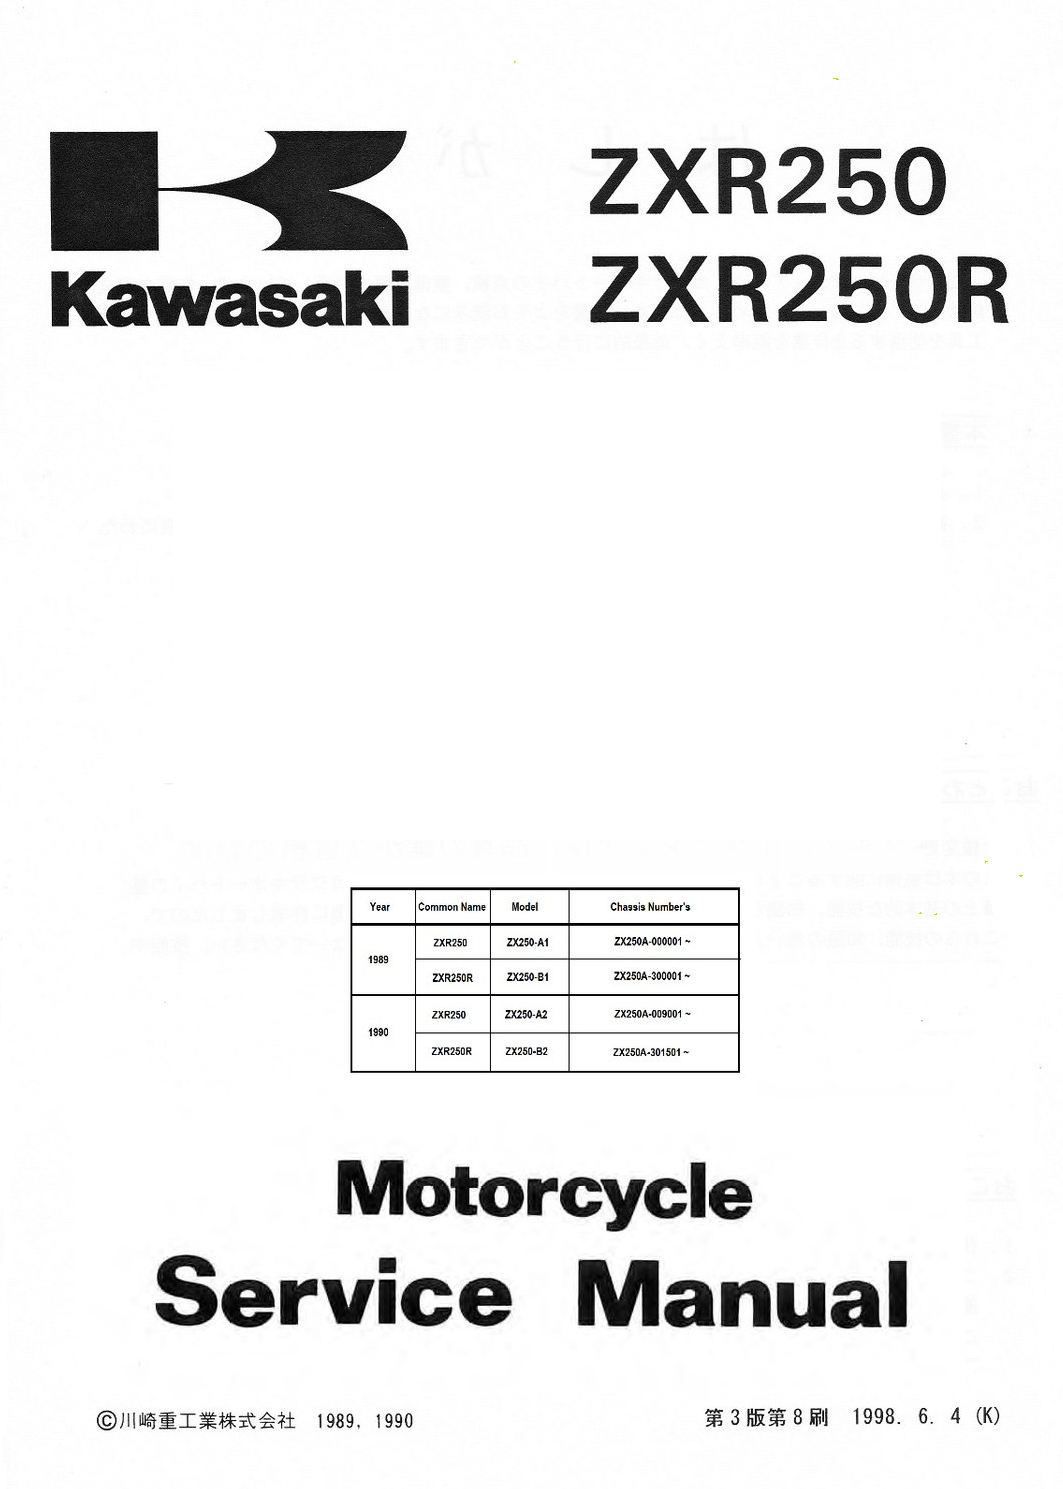 ZXR250A cover english.png